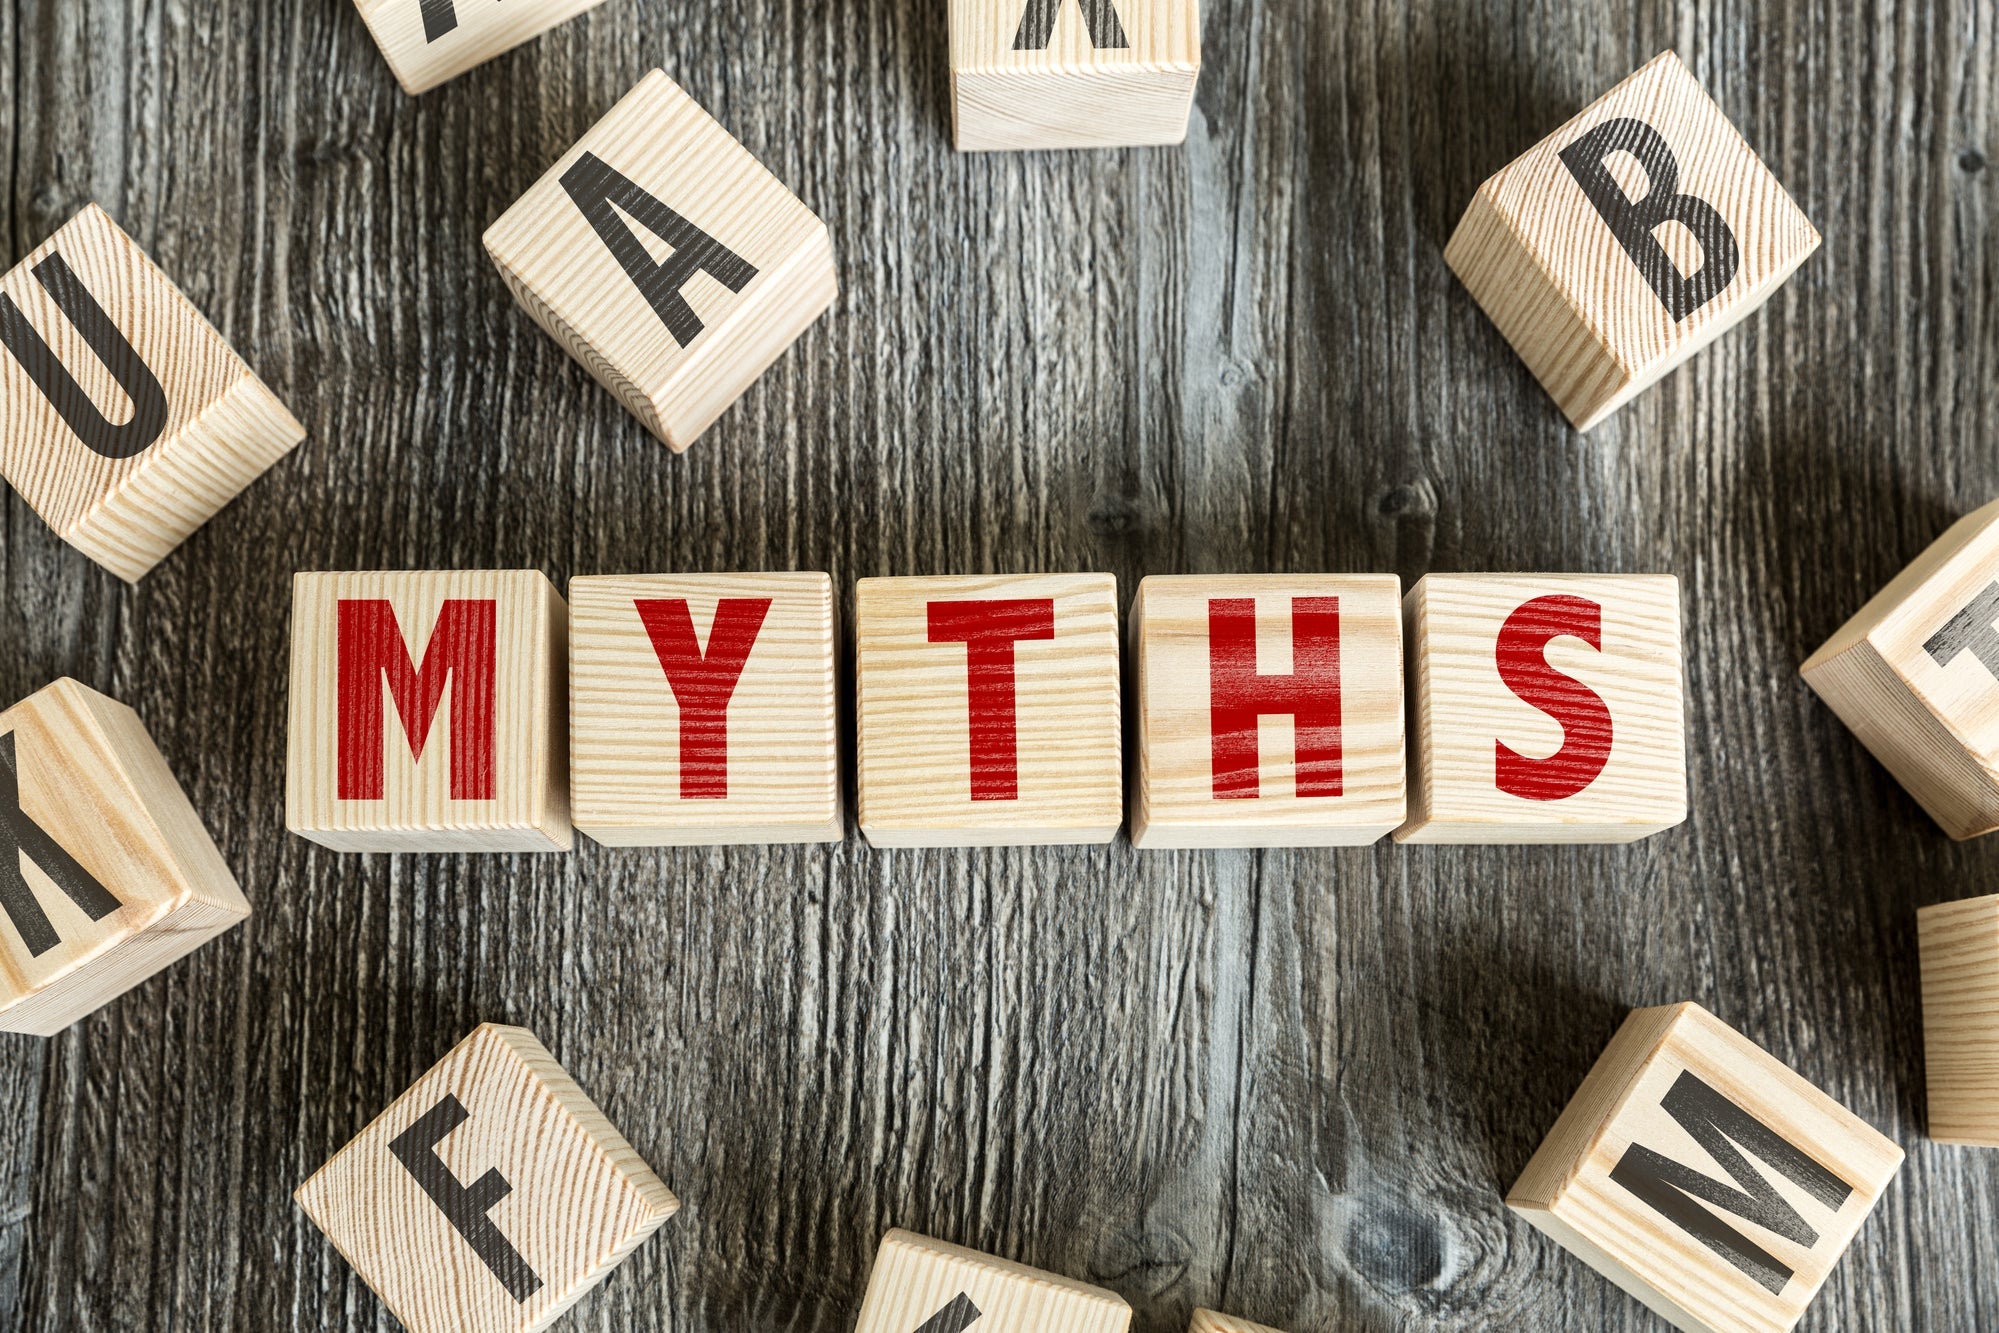 26 Myths About CBD: Where Is The Truth? - My Blissful Pet